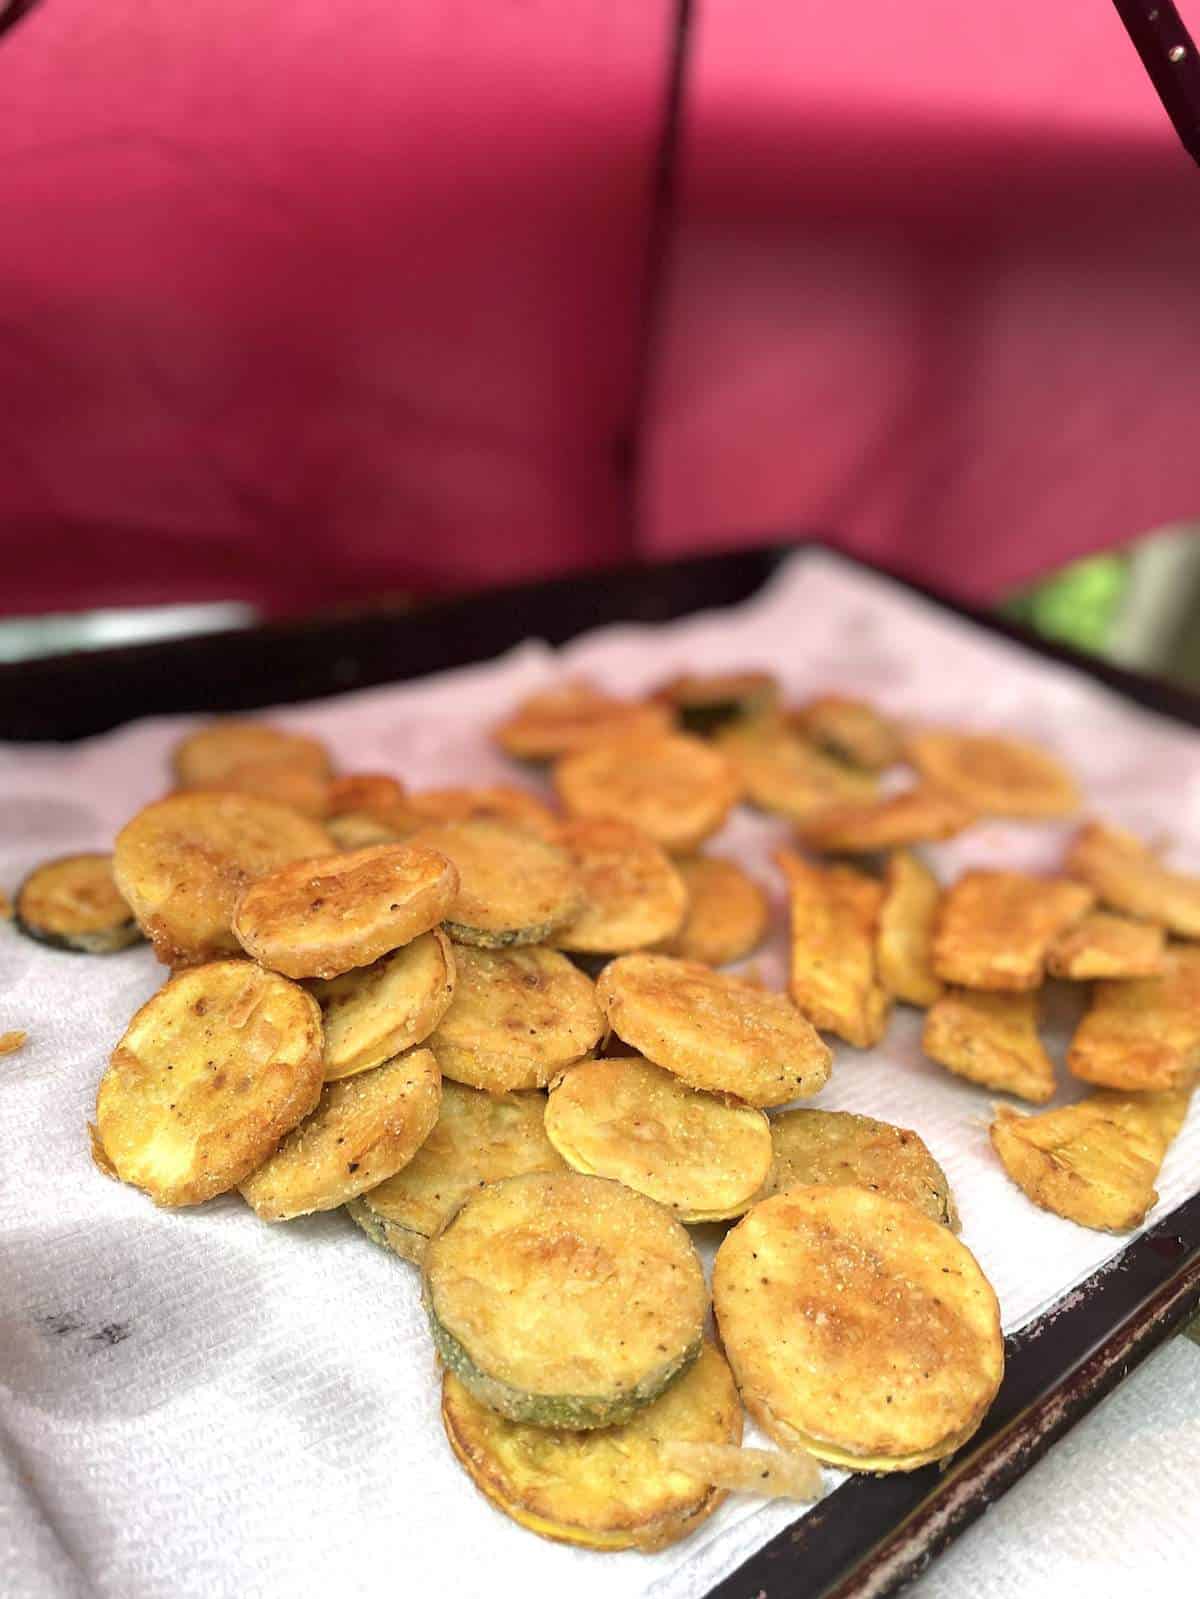 Fried squash slices and strips on a paper towel with an umbrella covering them.